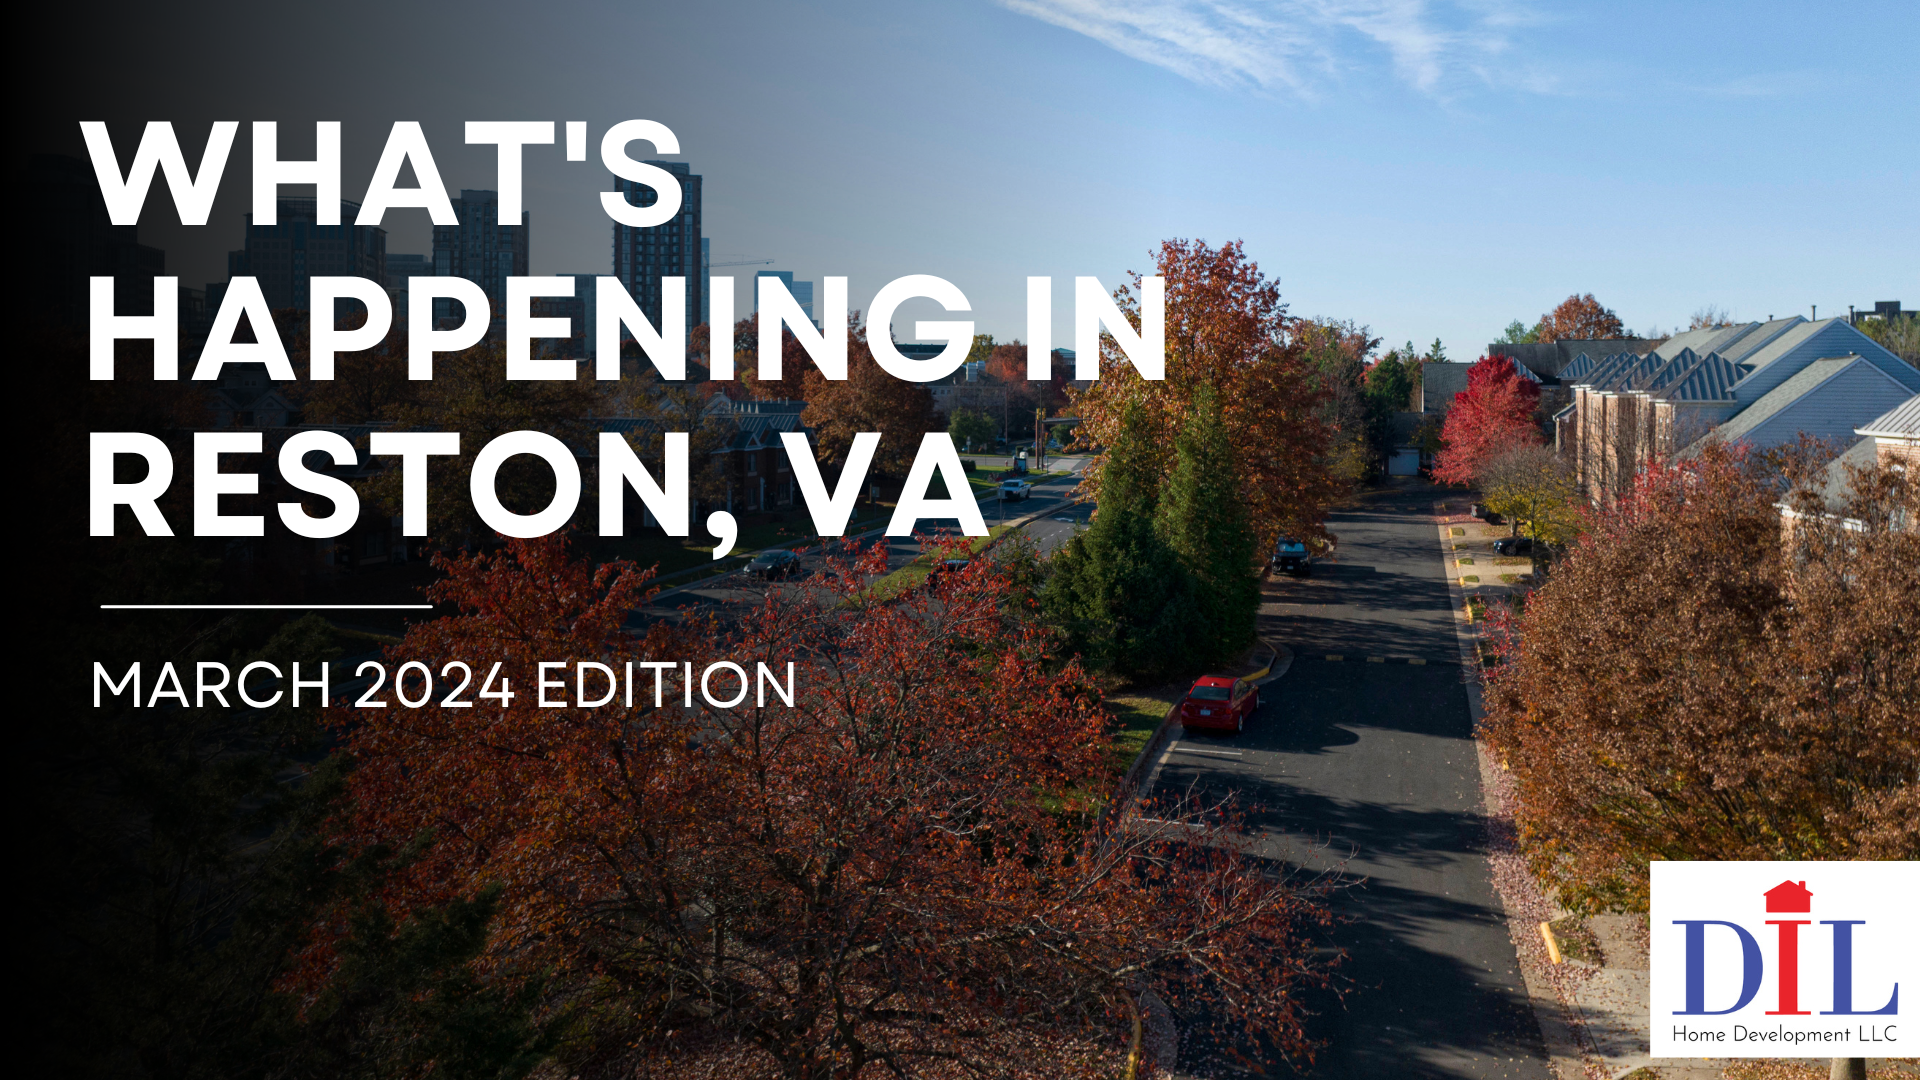 What’s Happening in Reston, VA: March 2024 Edition